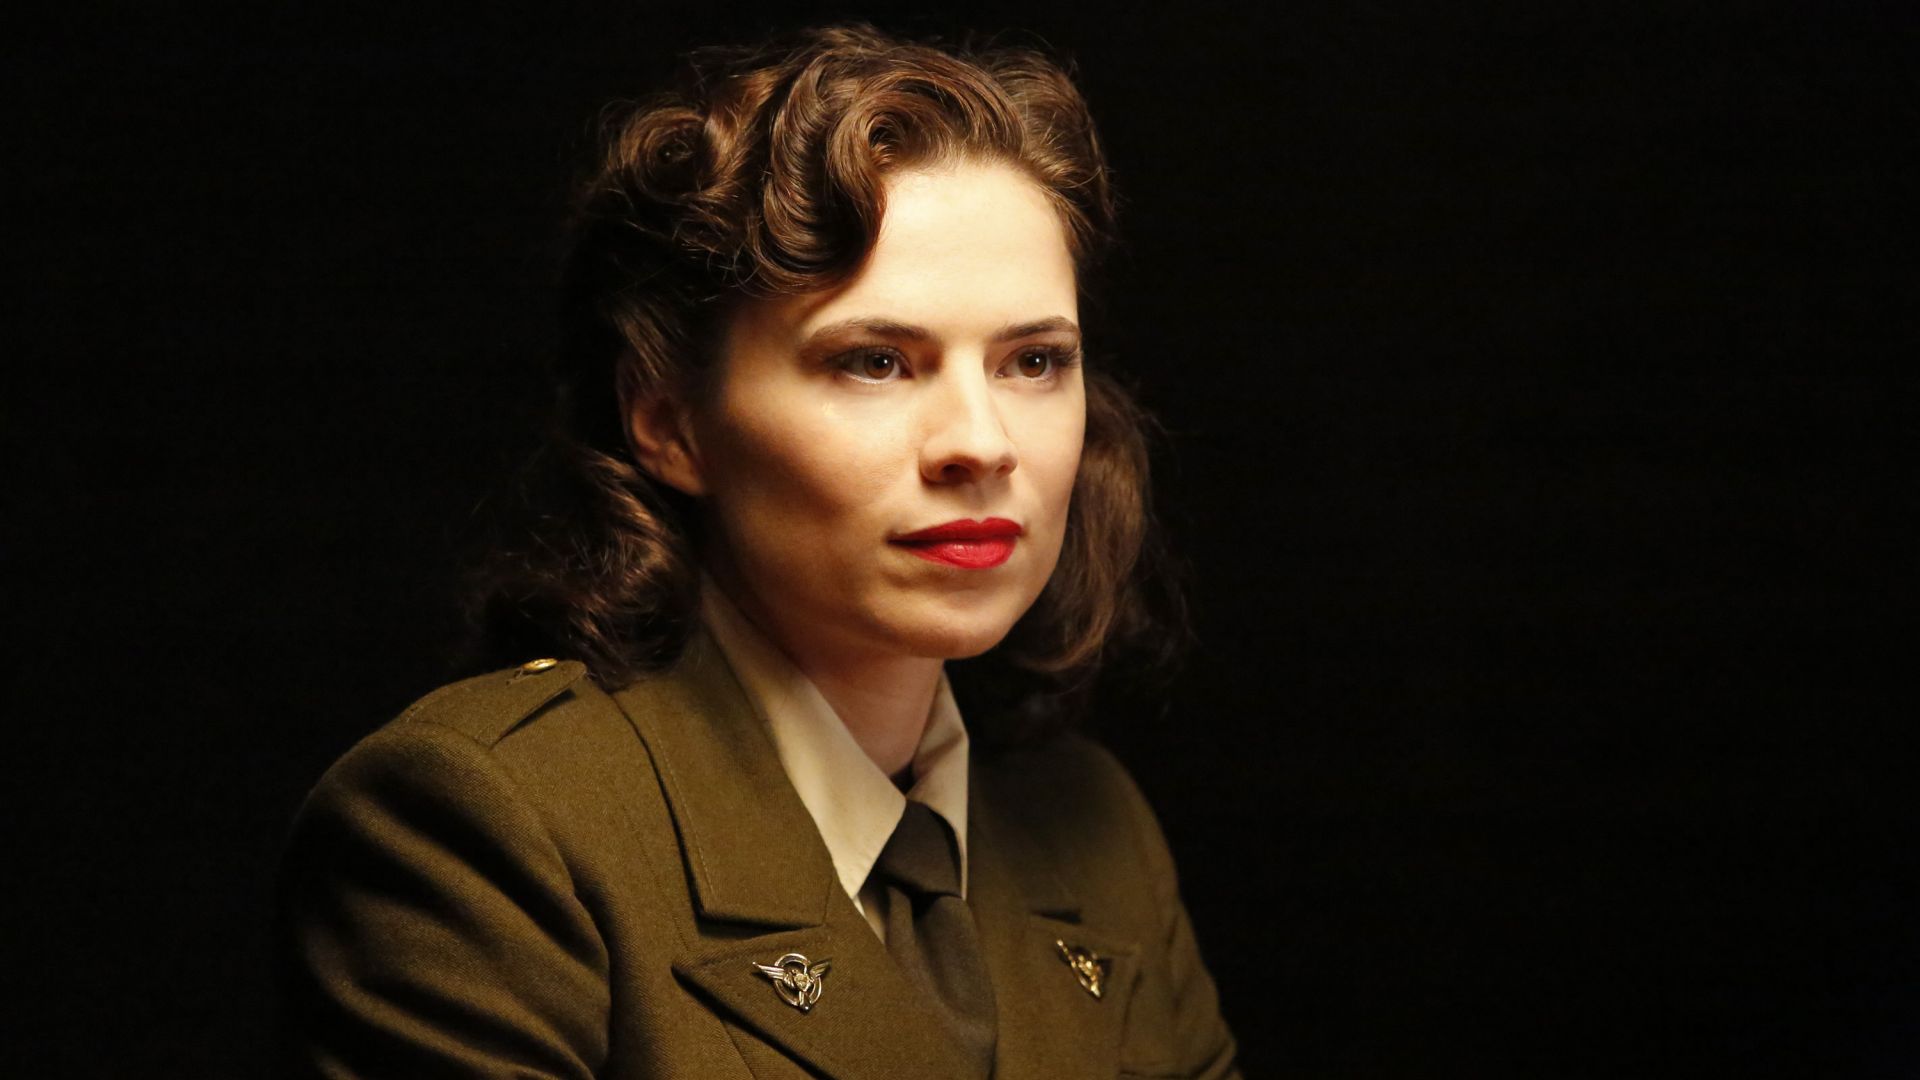 Wallpaper Agent carter, Hayley Atwell, marvels agents of shield TV show